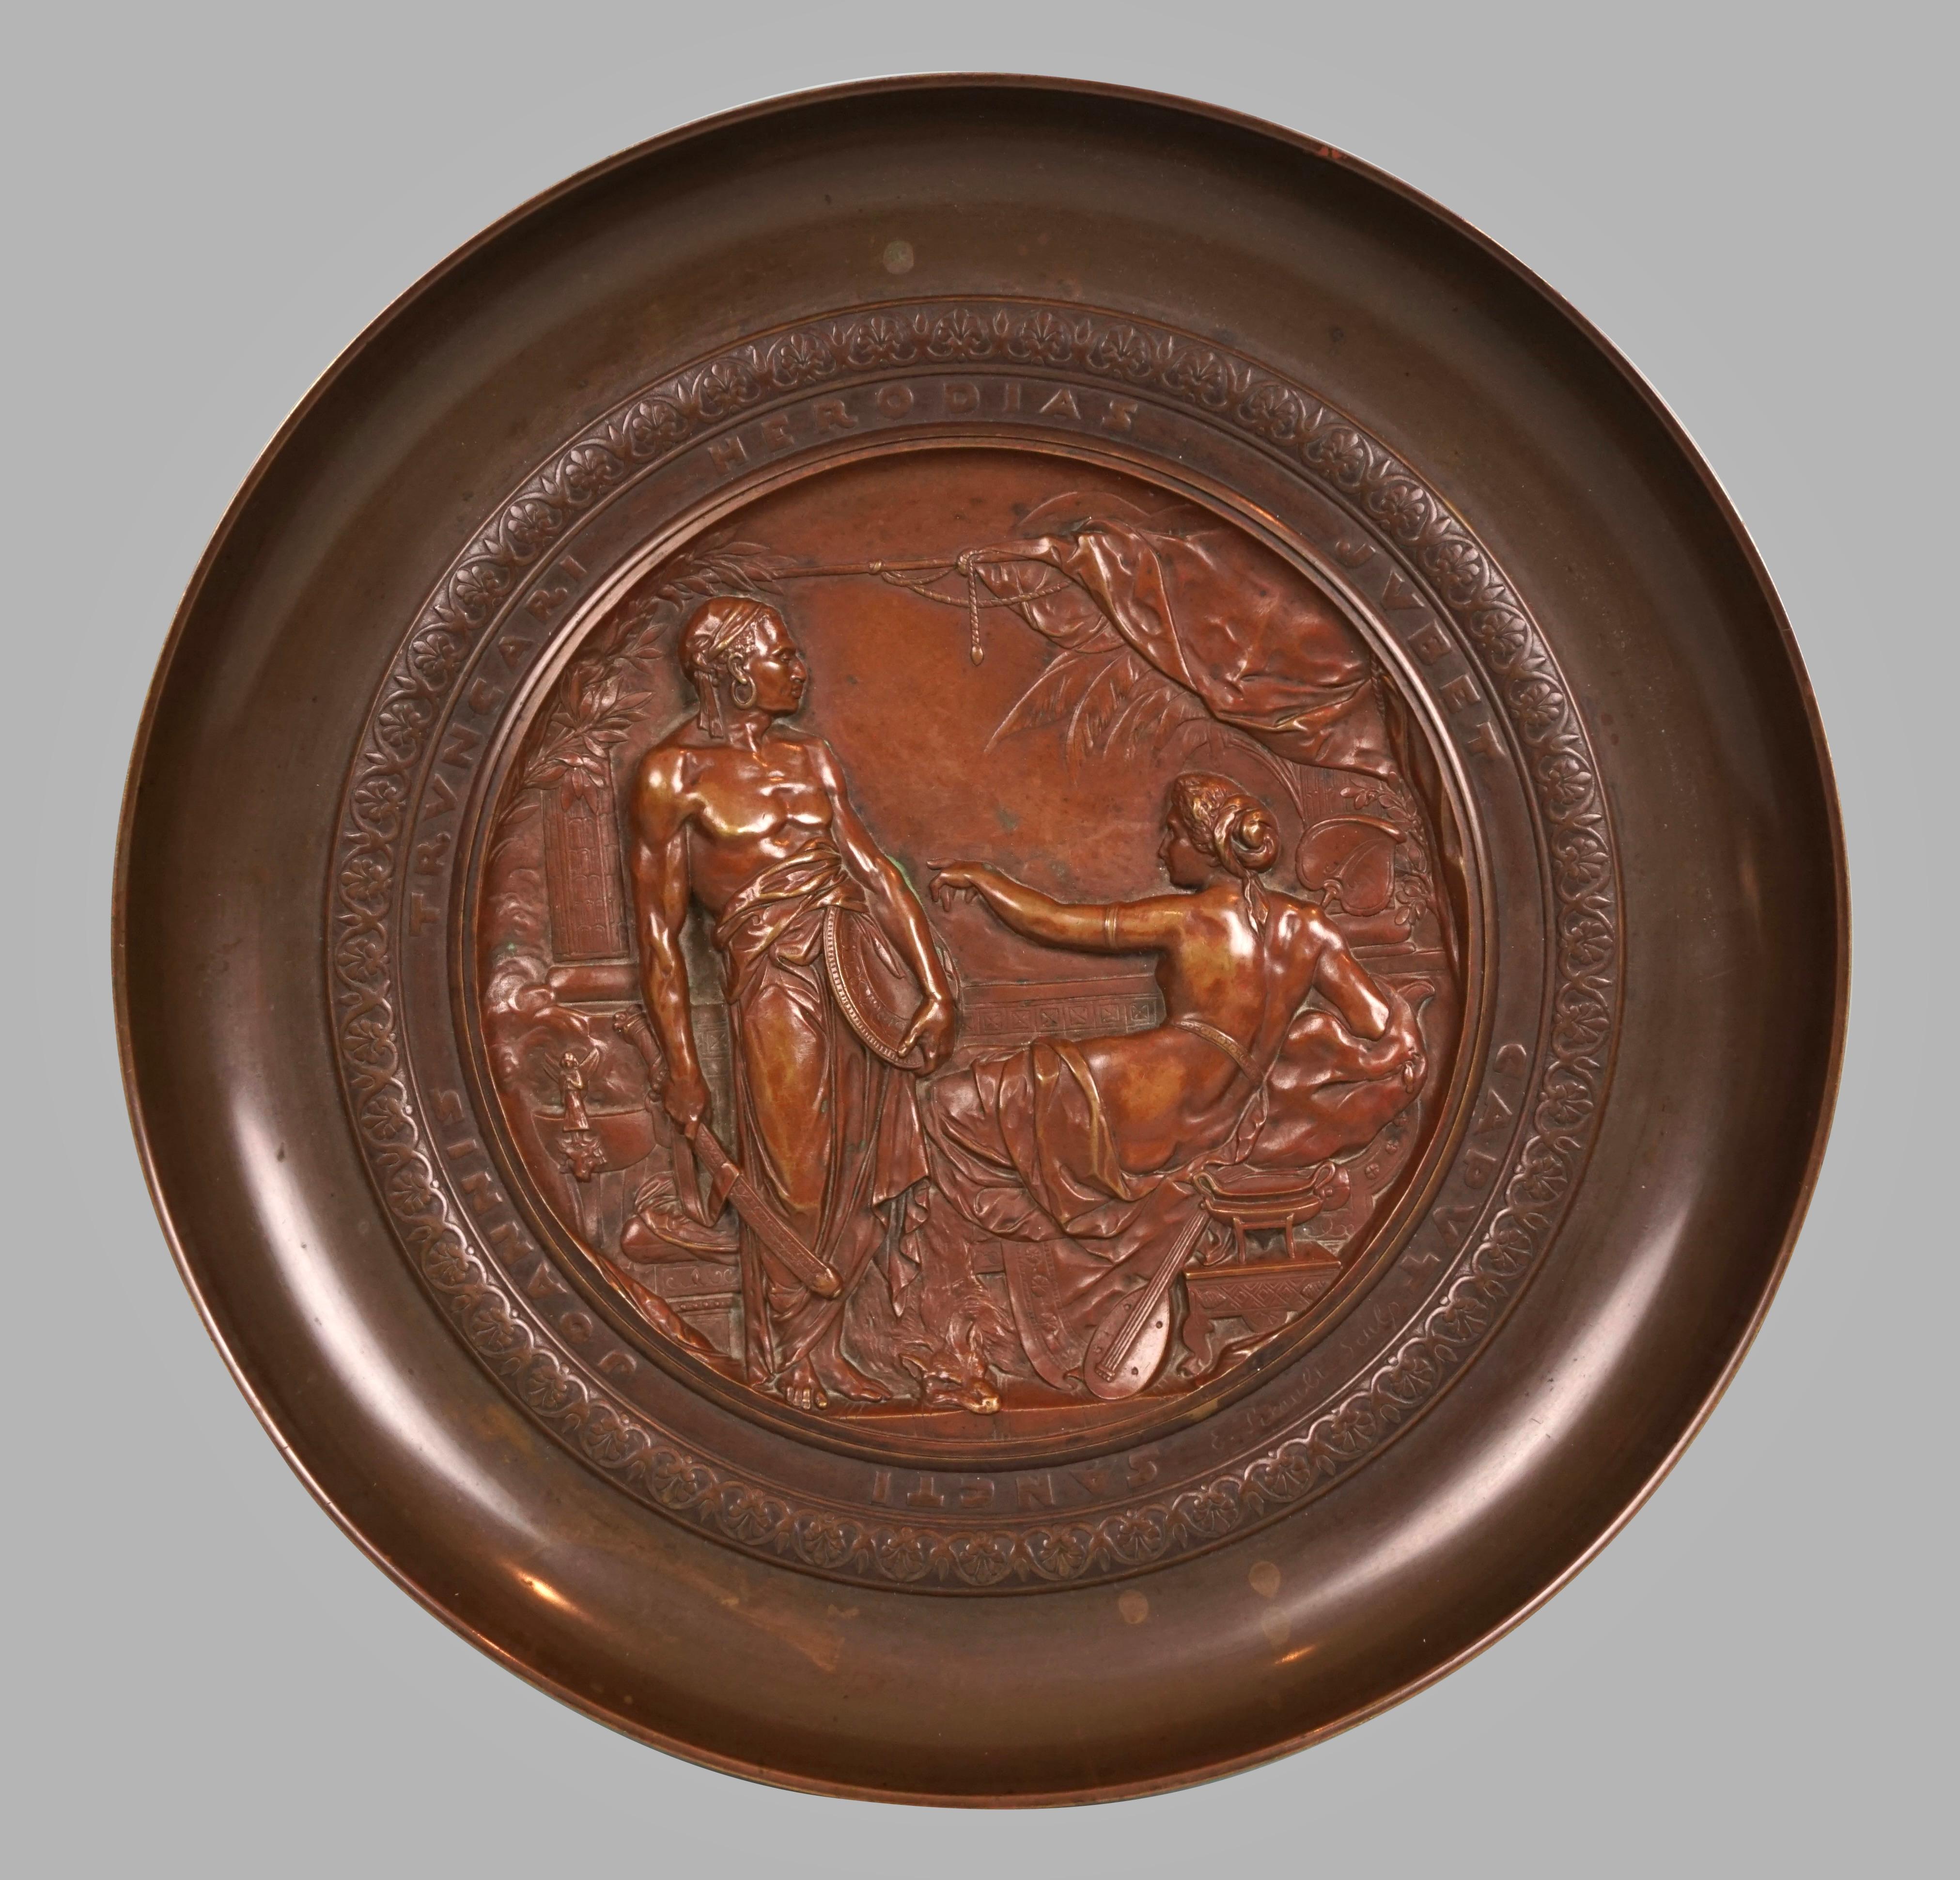 A neoclassical style bronze tazza or Athenienne made and signed by Emile Louis Picault, a well-listed French sculptor (1833-1915) depicting a romantic garden scene with a classically garbed couple, he with weapons of war, and she with a lute. The